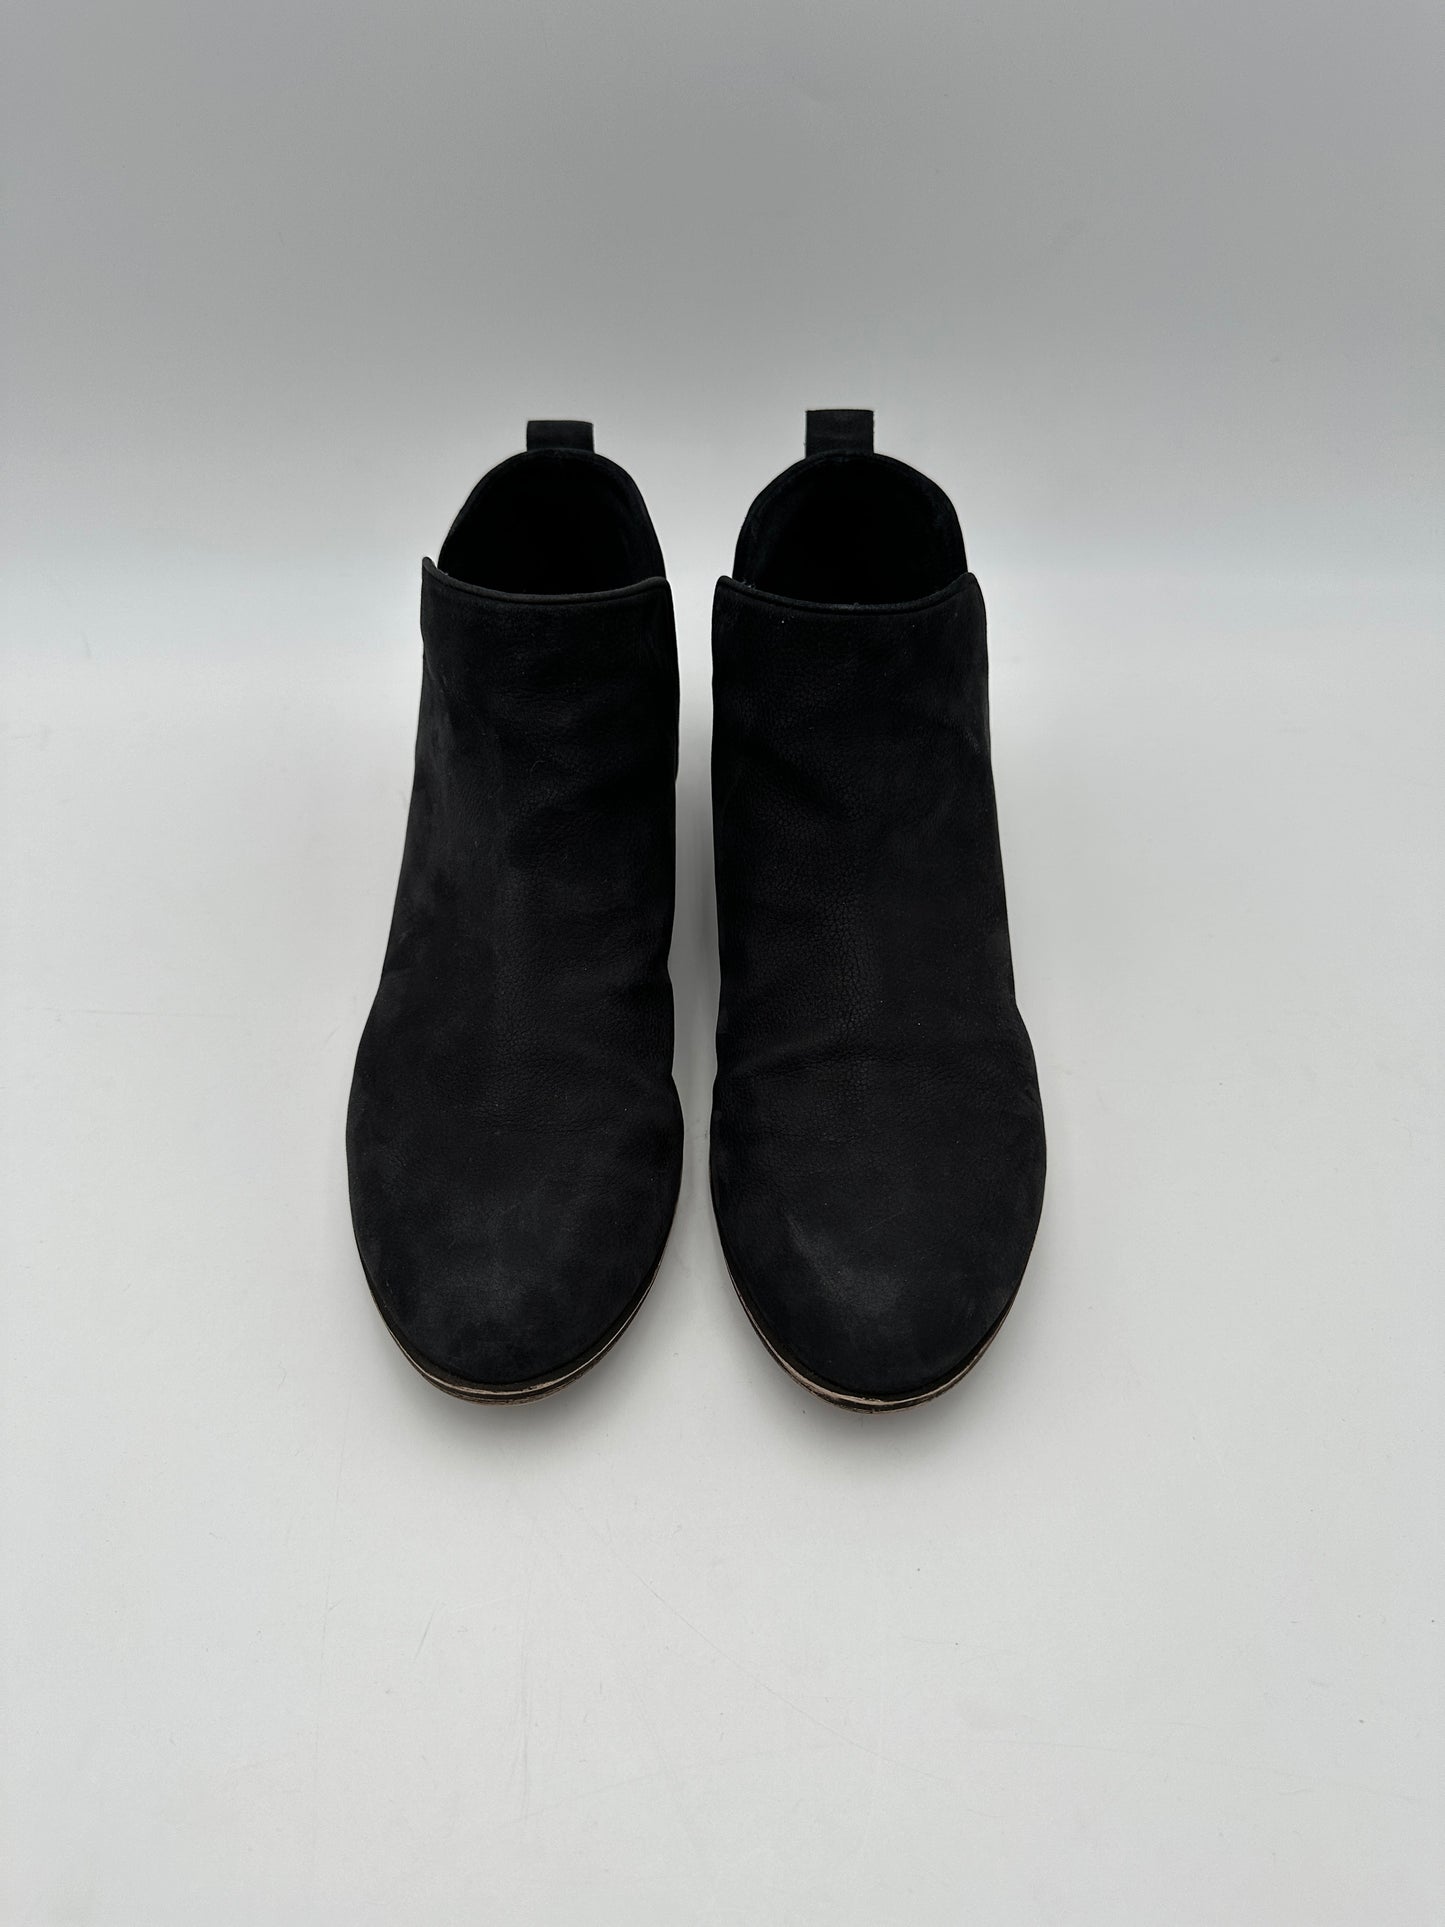 BP. Size 9M Black Suede Ankle Boots Booties, 2 3/8" heel